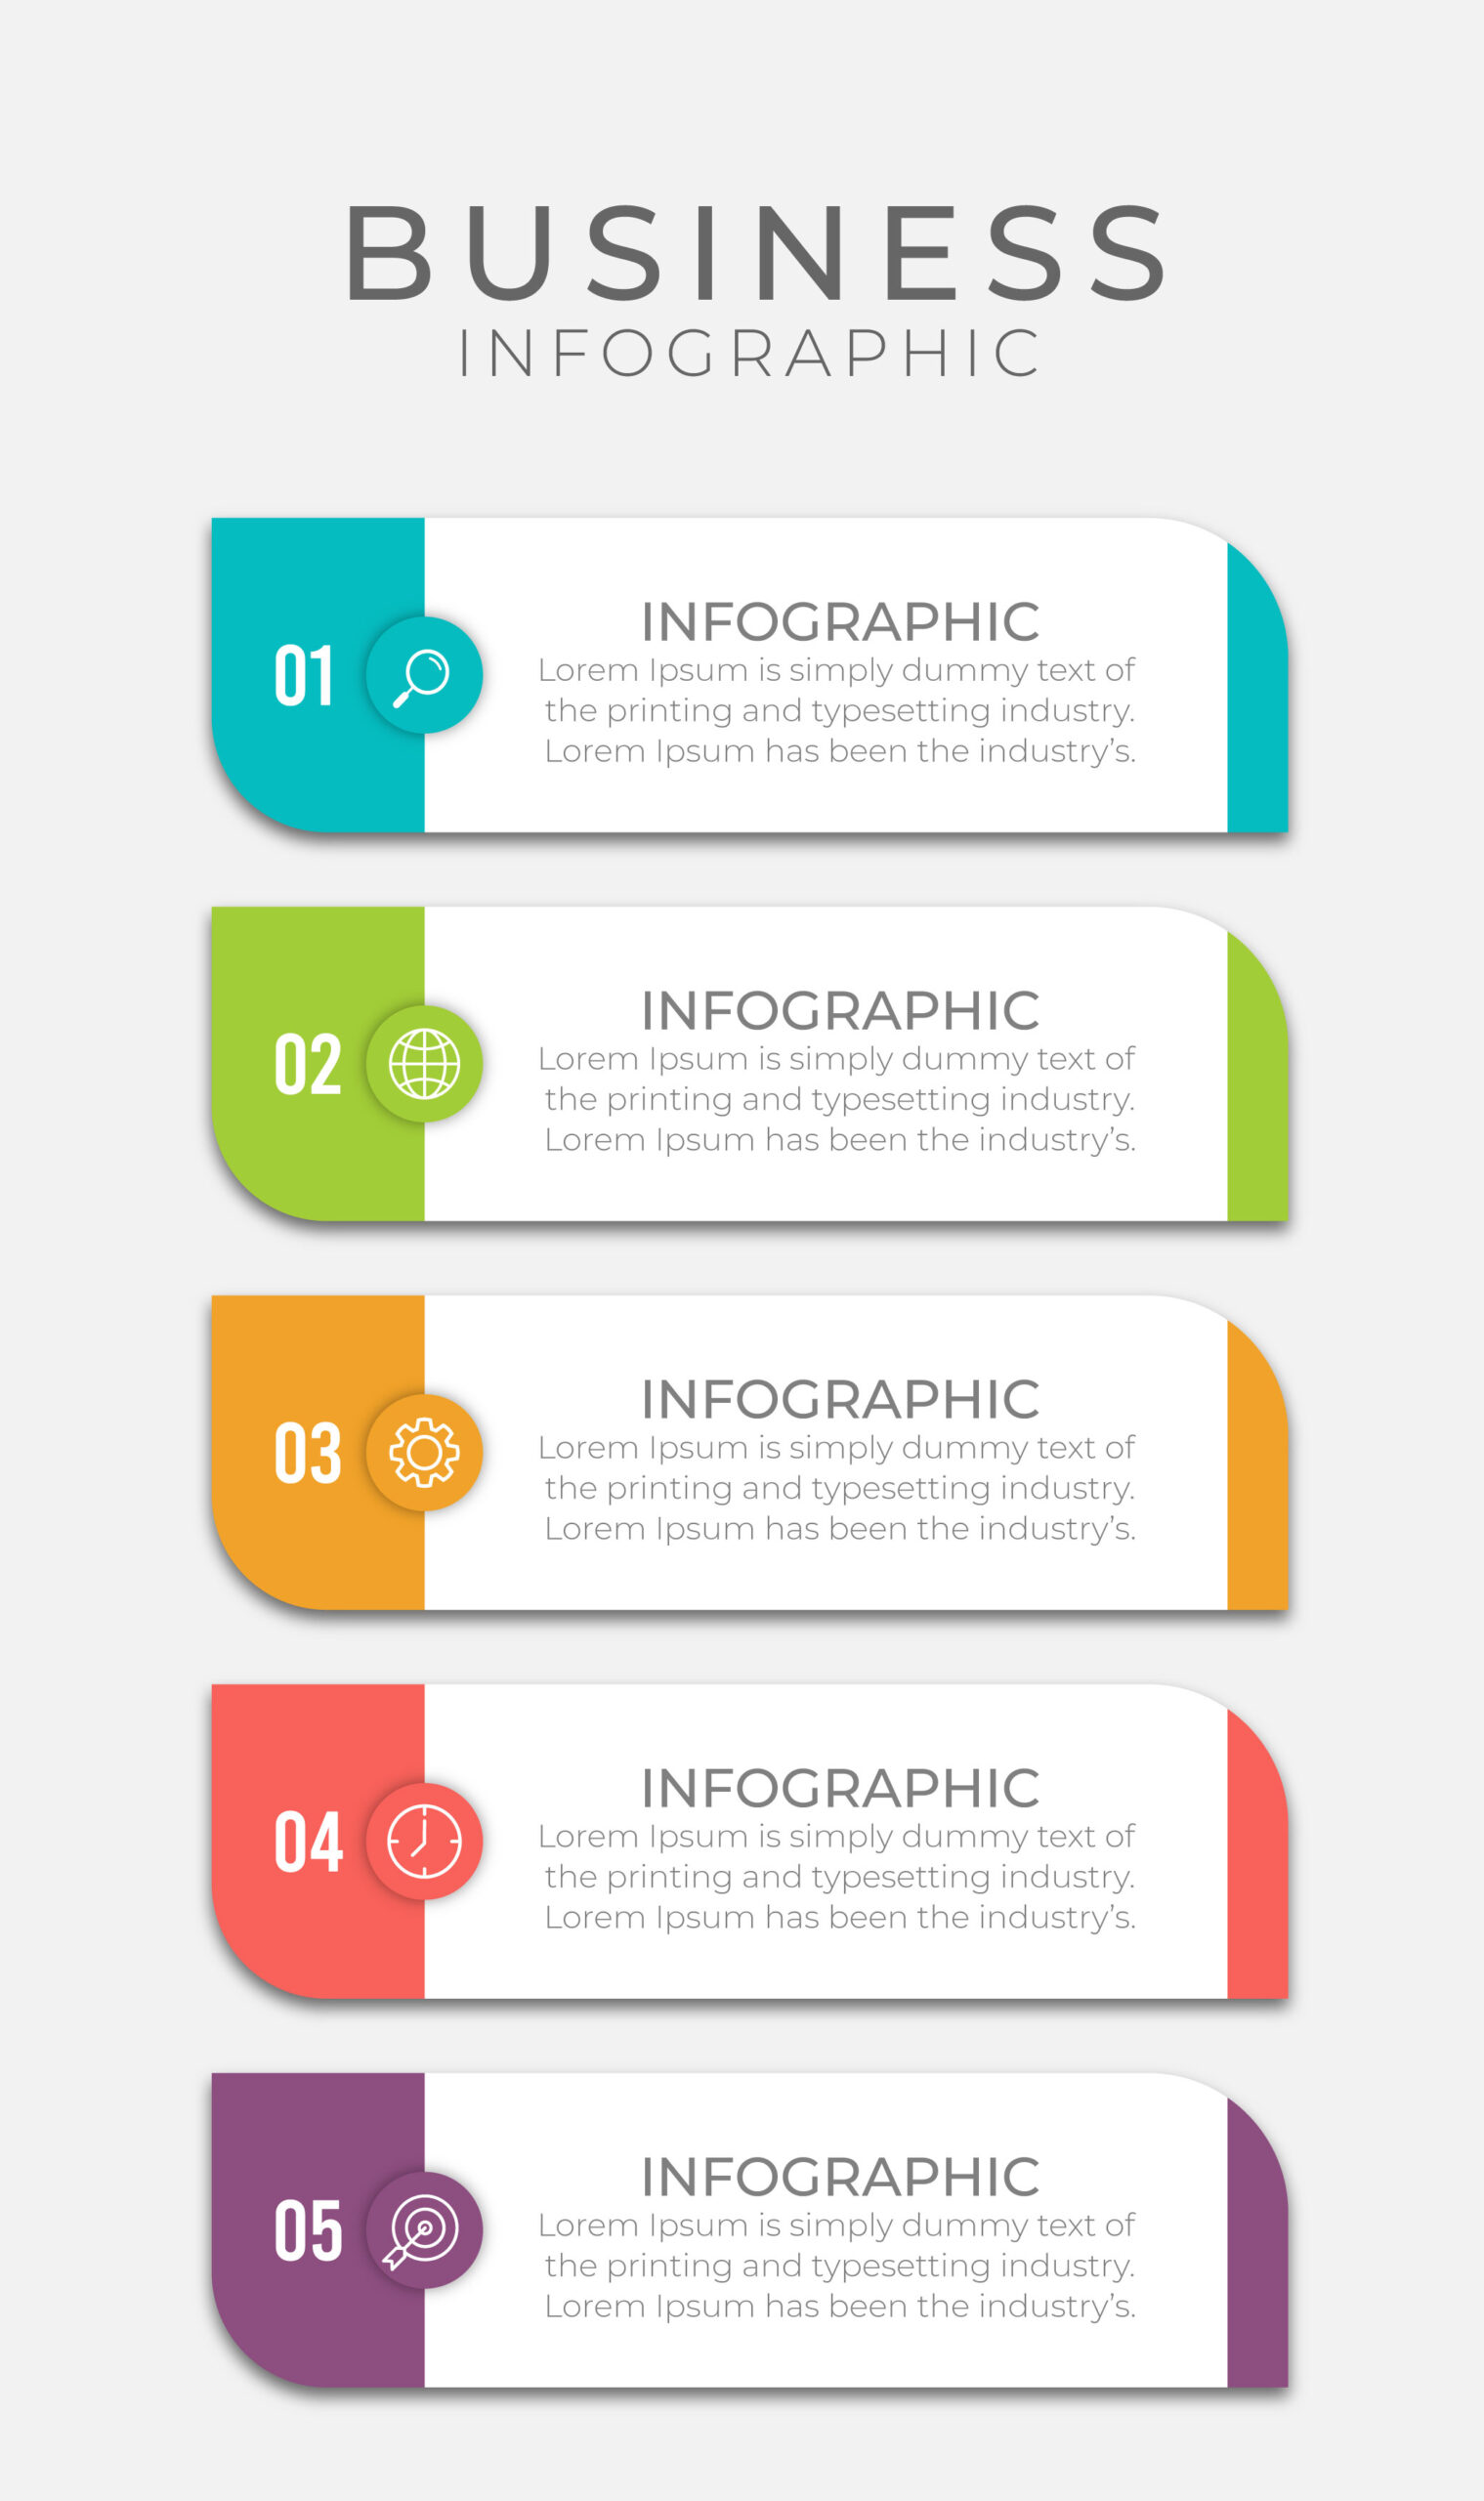 Design Business template 8 steps infographic chart element with place date for presentations ...